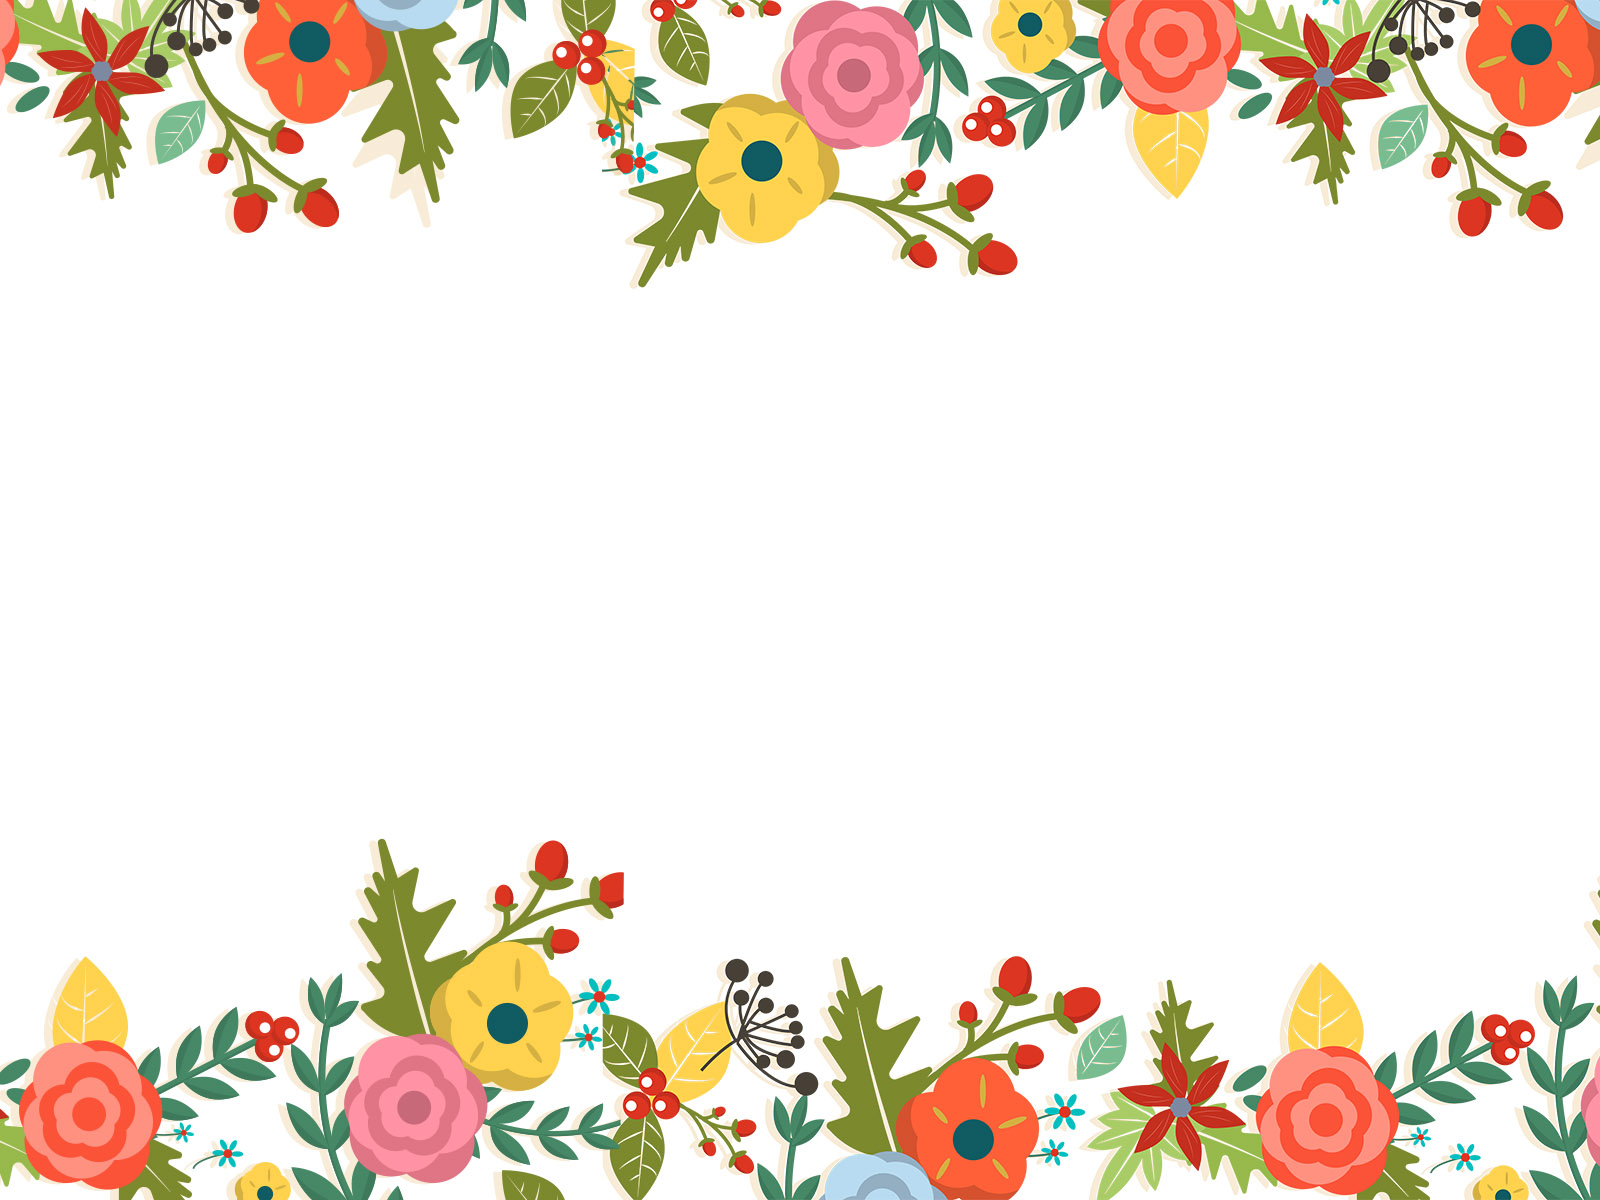 free-download-cute-floral-powerpoint-templates-border-frames-flowers